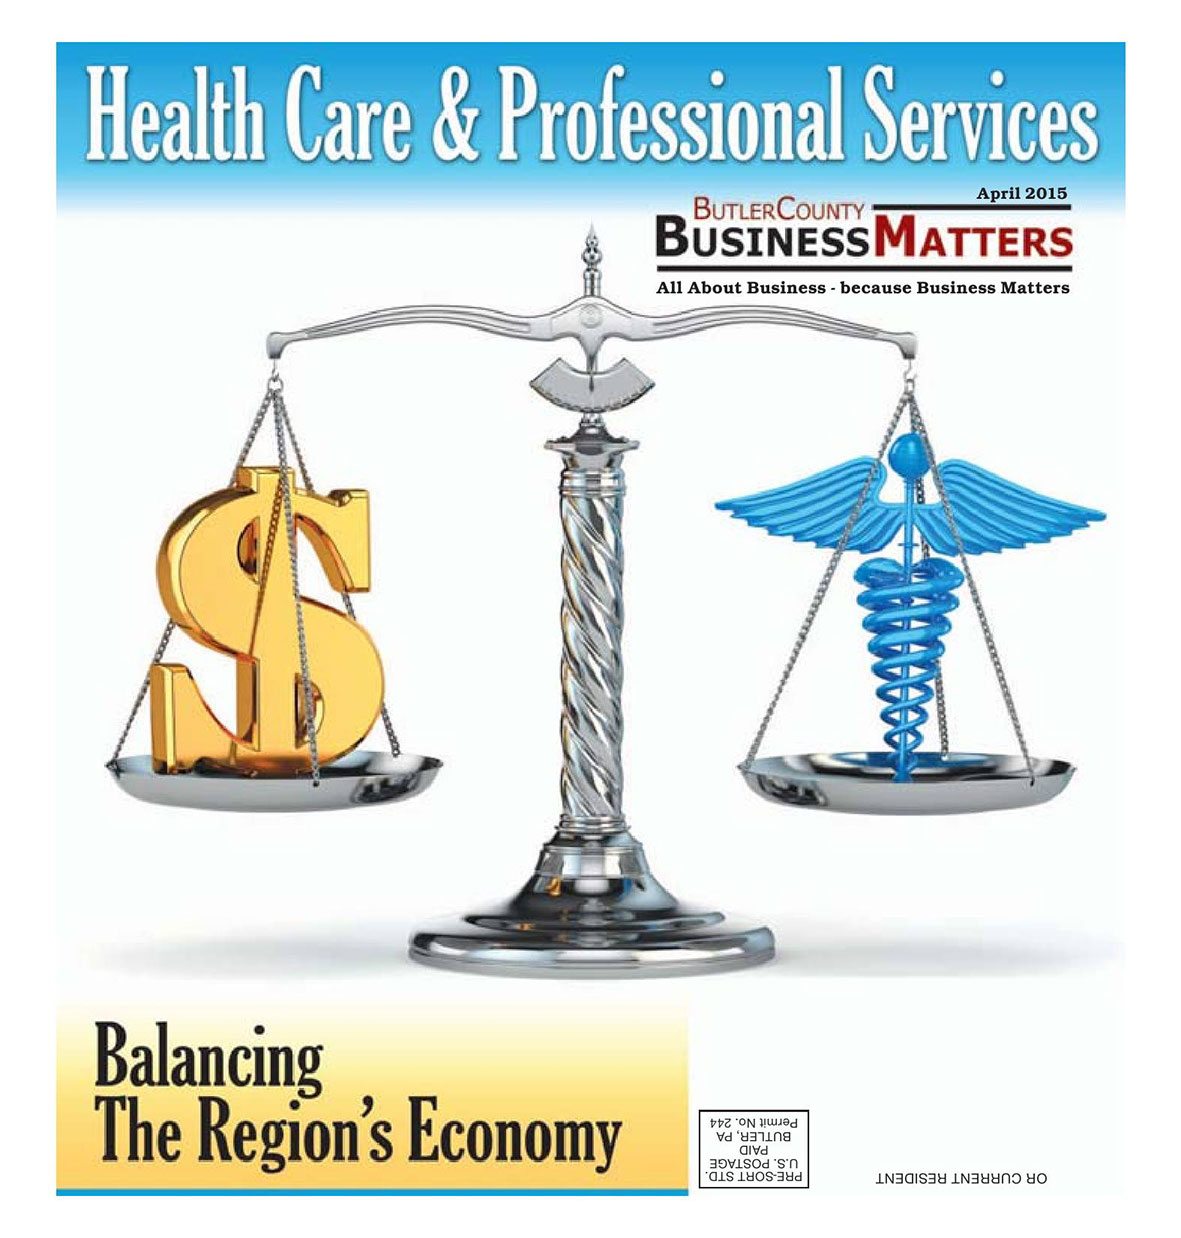 April 2015 - Health Care & Professional Services - Balancing the Region's Economy